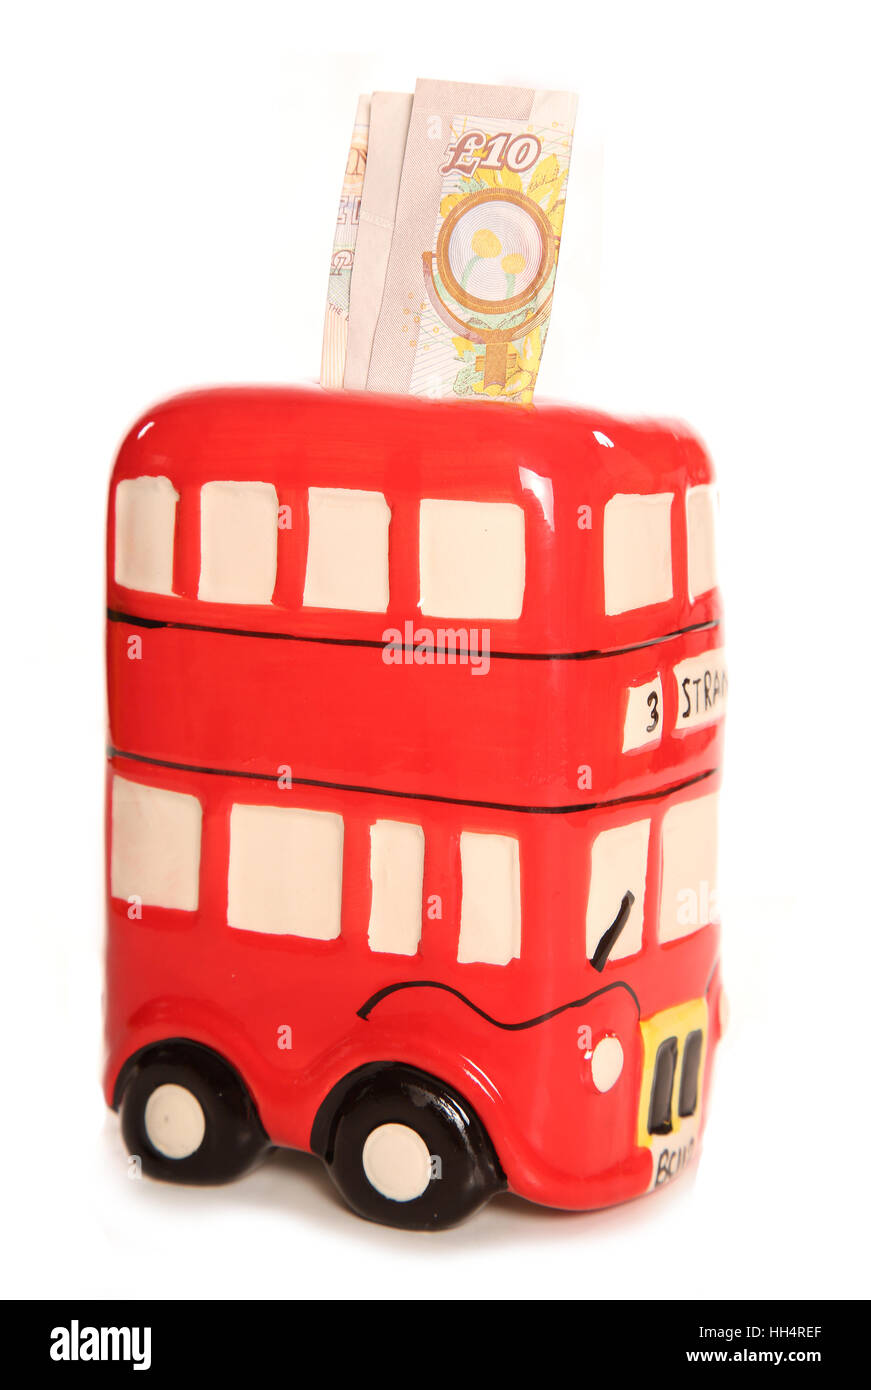 London red bus ornament money box with ten pound note cutout Stock Photo